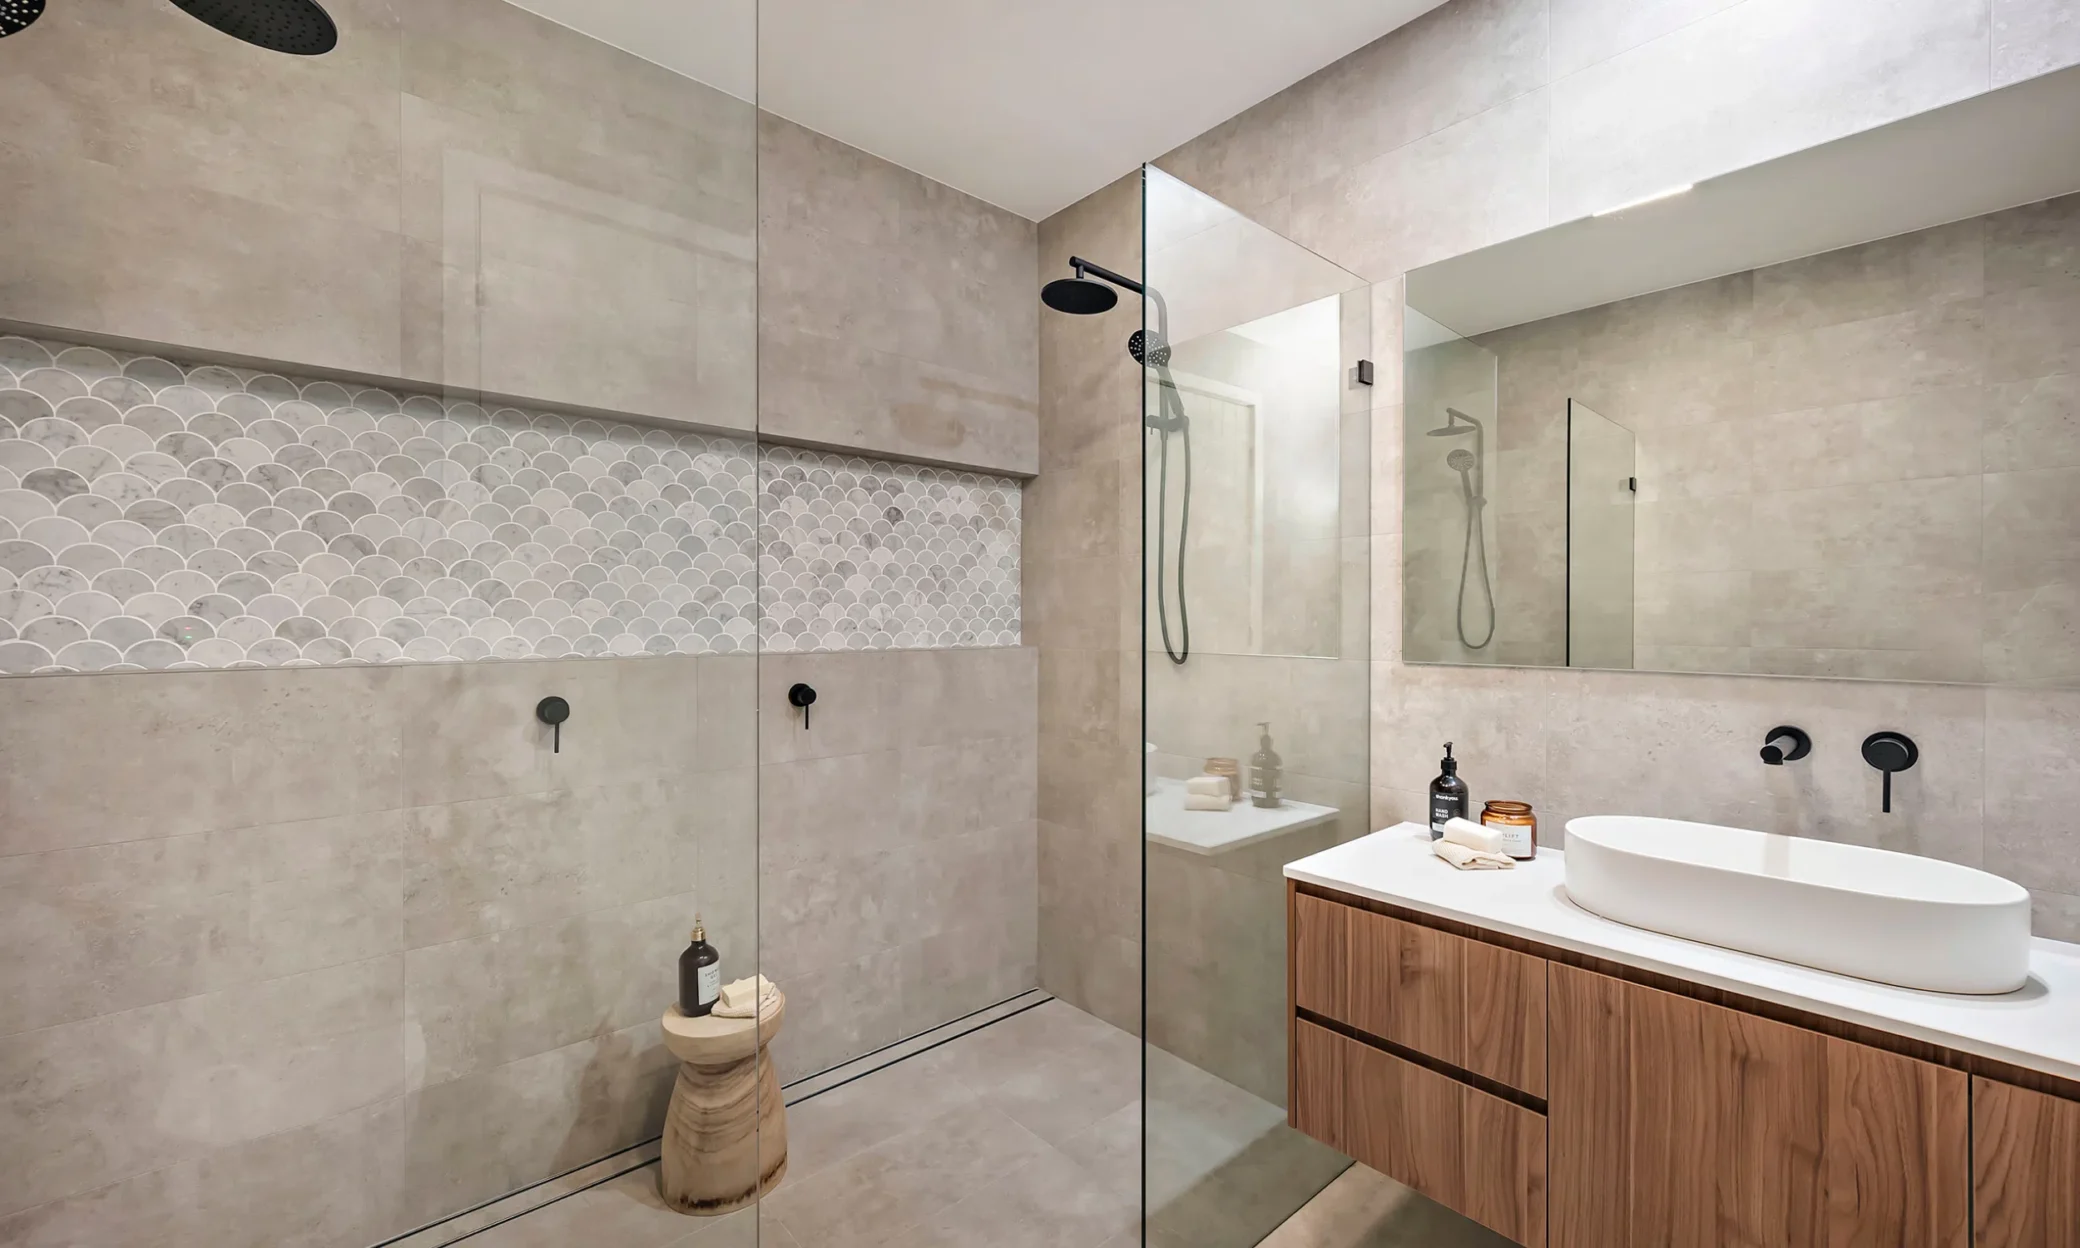 Modern bathroom in Newcastle featuring beige tiles, wooden vanity with two sinks, wall-mounted faucets, large mirror, and a walk-in shower with glass door and dual shower heads.